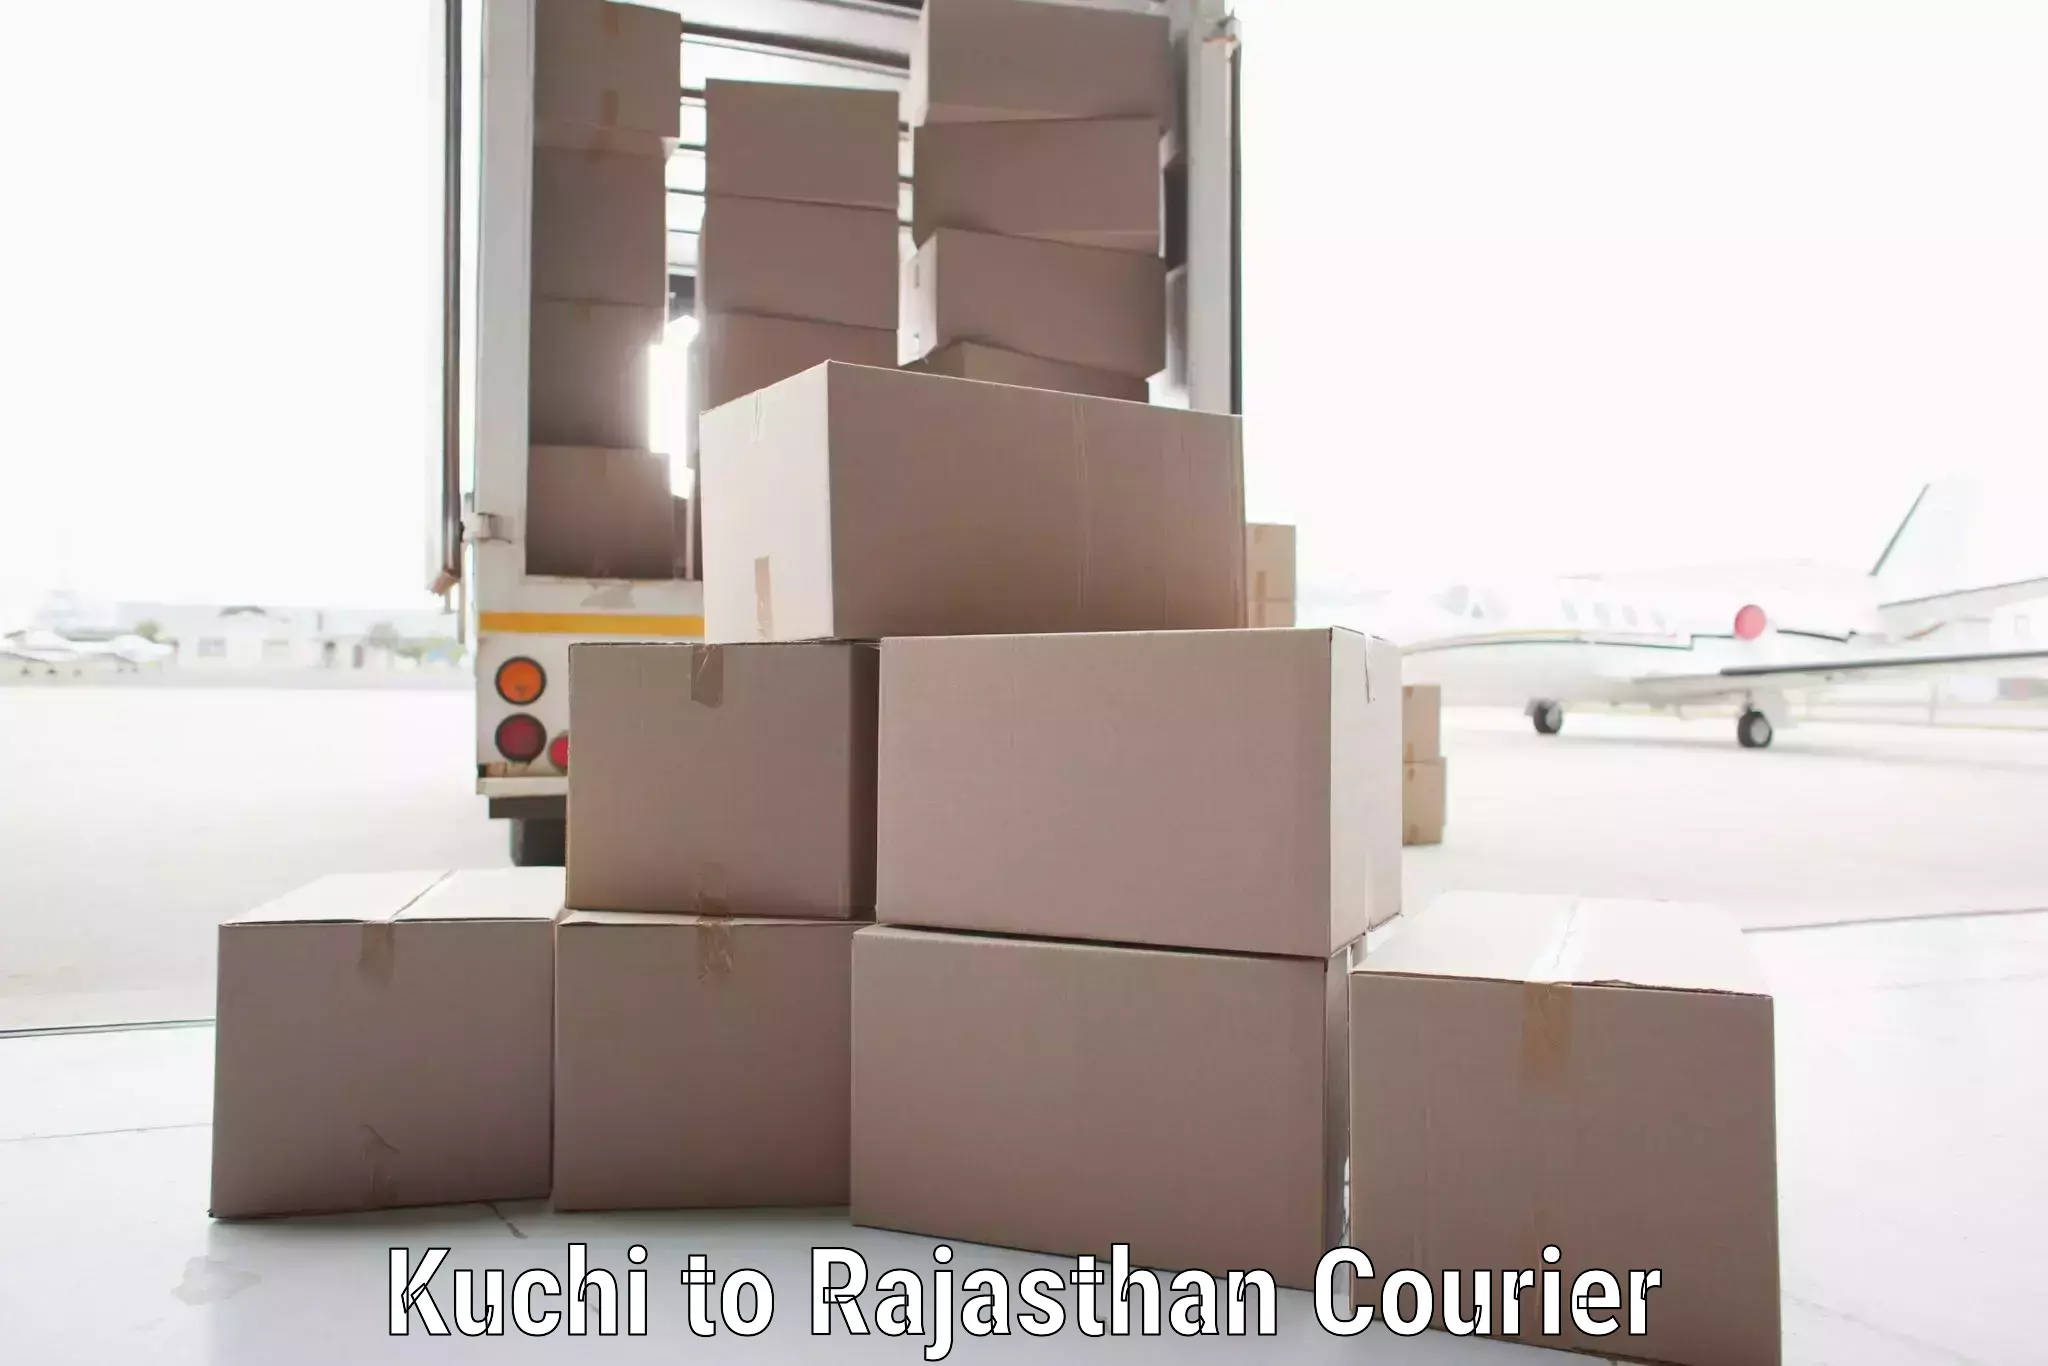 Nationwide parcel services Kuchi to Chaumahla